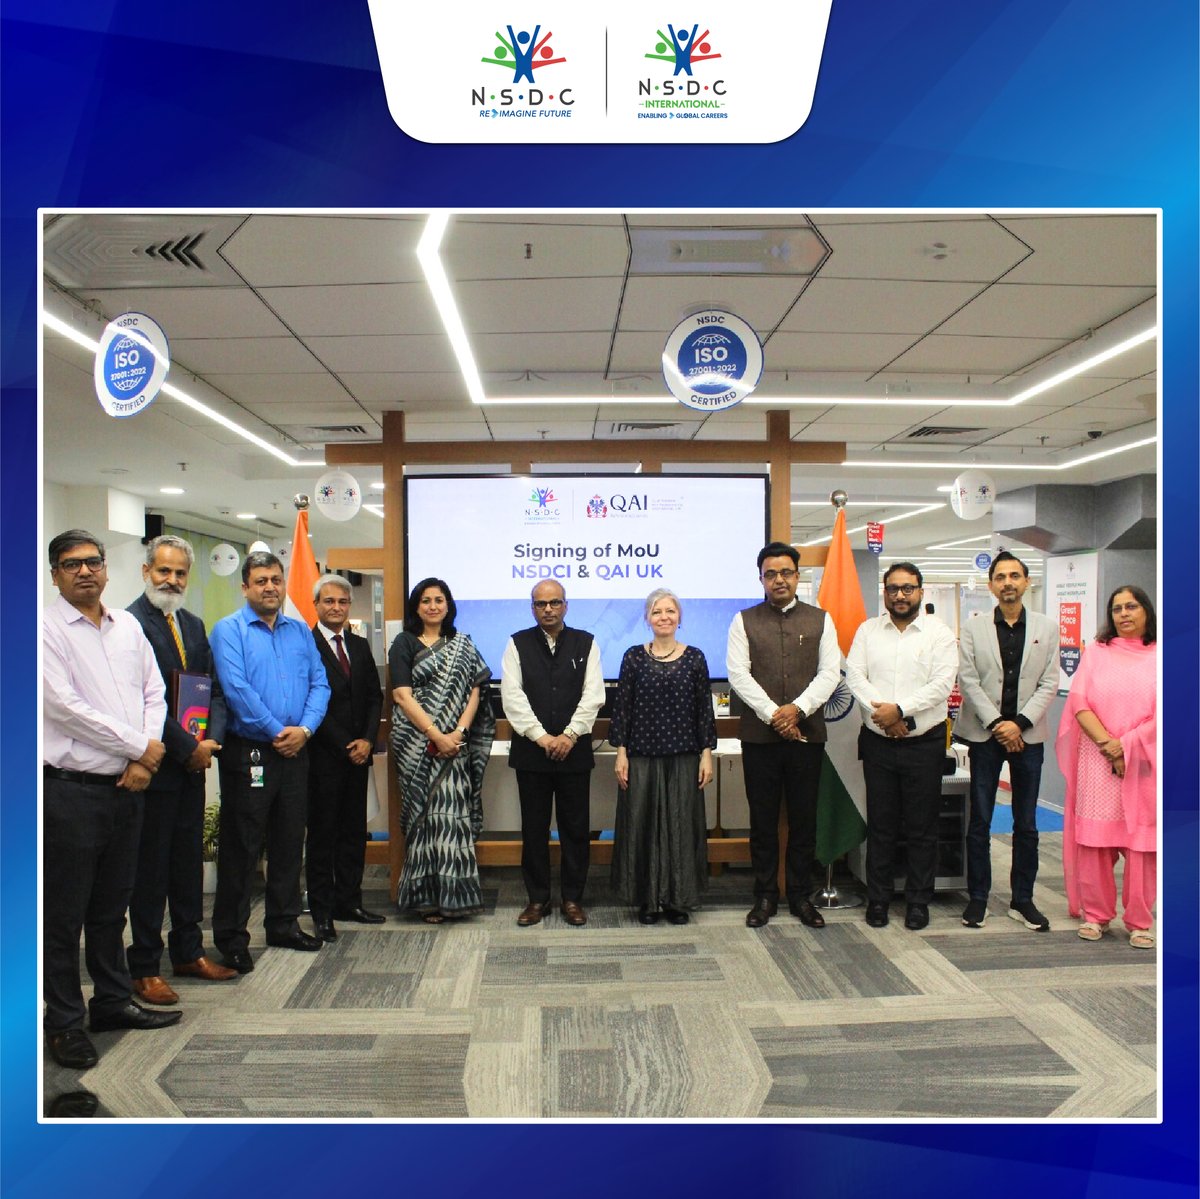 #NSDCInternational and Qualification & Assessment International (#QAI) signed MoU to help Indian healthcare workers find jobs overseas. QAI will test and train NSDCI candidates, while NSDC International will work with QAI to prepare Indian healthcare workers for international job